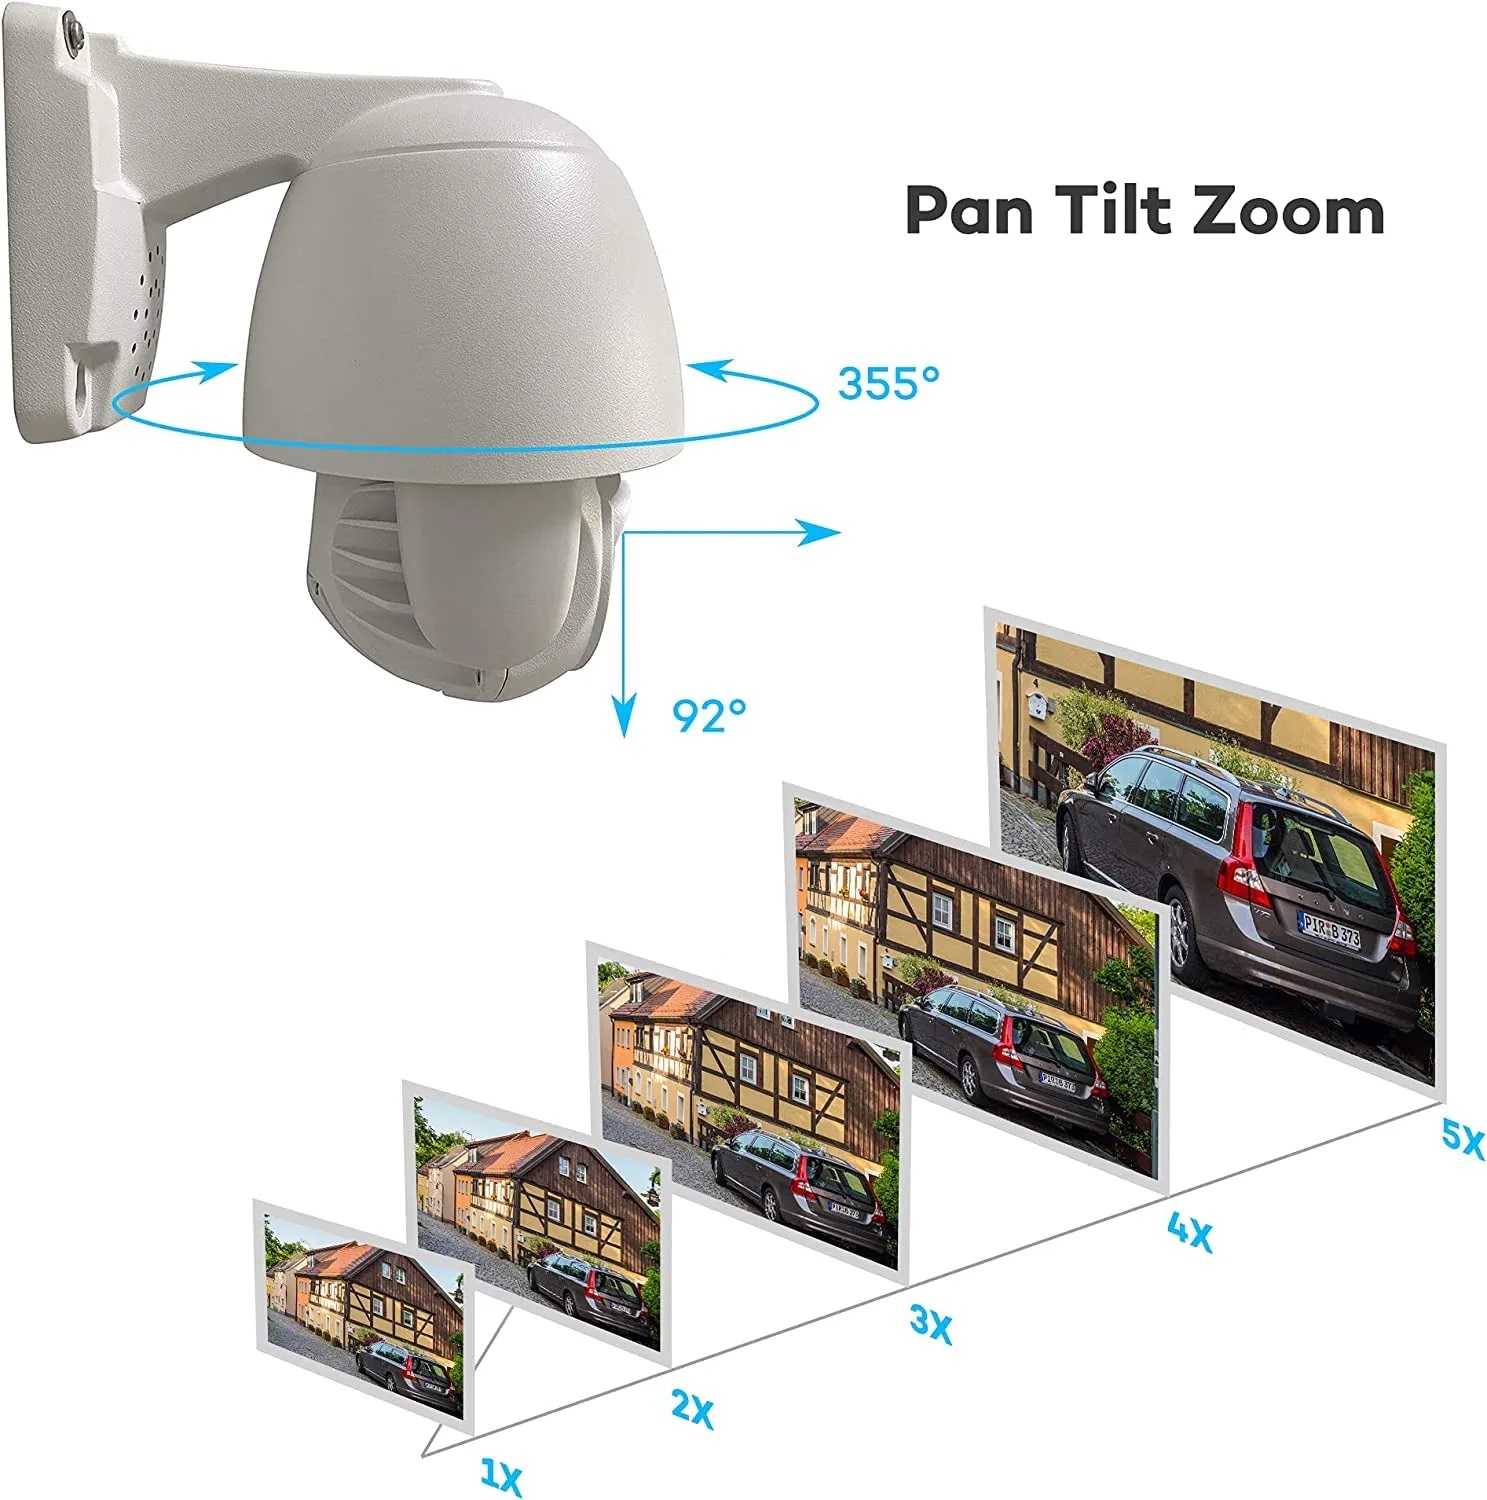 Microseven Open Source 6MP (3072x2048) UltraHD PoE+ 355° Pan 92° Tilt 5X 2.7-13.5MM Optical Zoom PTZ Speed Dome IP Camera, Human Vehicle Motion Detection & Auto Tracking, Indoor / Outdoor, WDR, DNR, Day & Night,IP66 Weatherproof, Built-in 256GB SDcard Slot, Two-Way Audio, Auto Cruise,ONVIF, Web GUI & Apps, VMS (Video Management System),24Hr Cloud Storage + Broadcasting on YouTube,Facebook & Microseven.tv